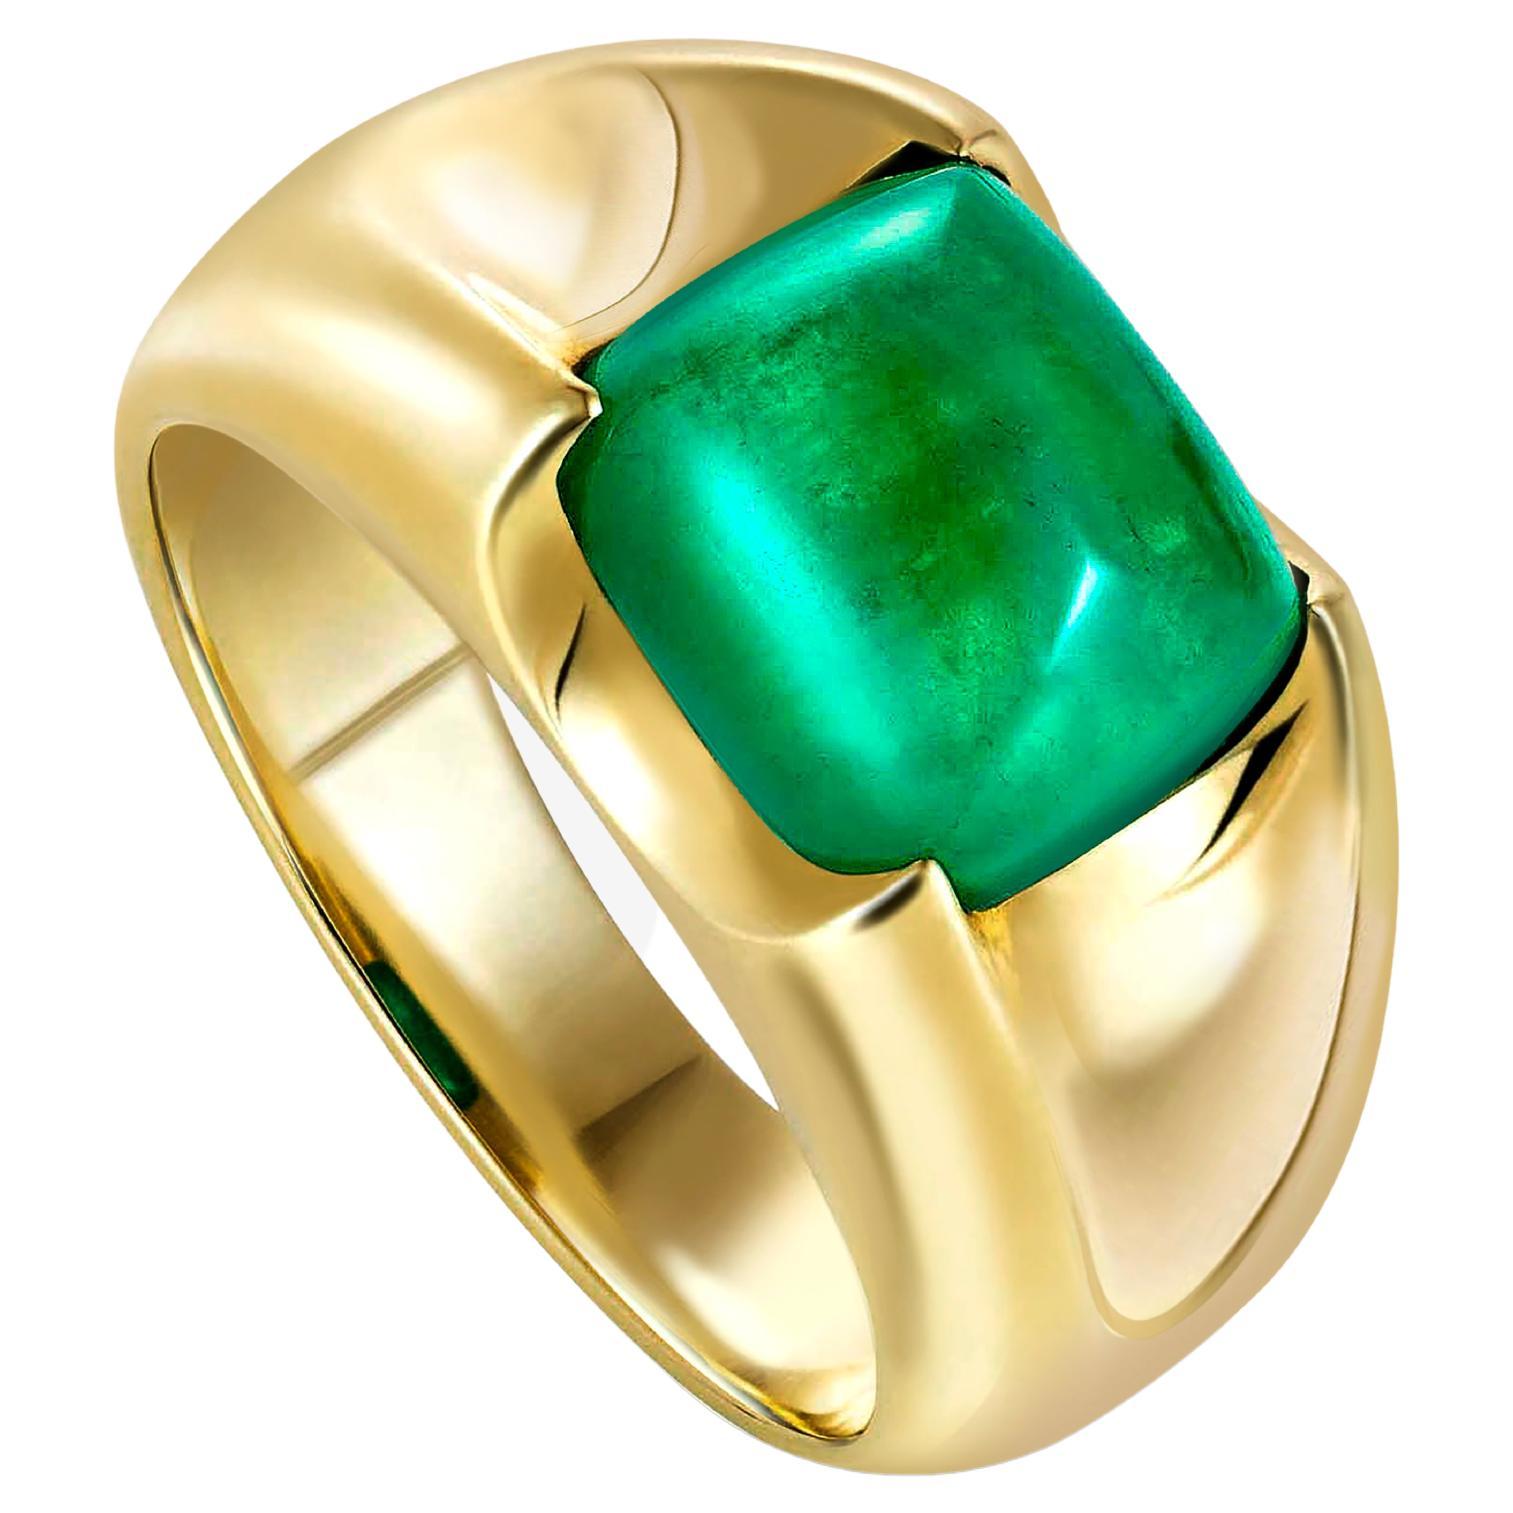 For Sale:  SPEAR TIP RING  Yellow gold with a sugarloaf emerald cabochon by Liv Luttrell